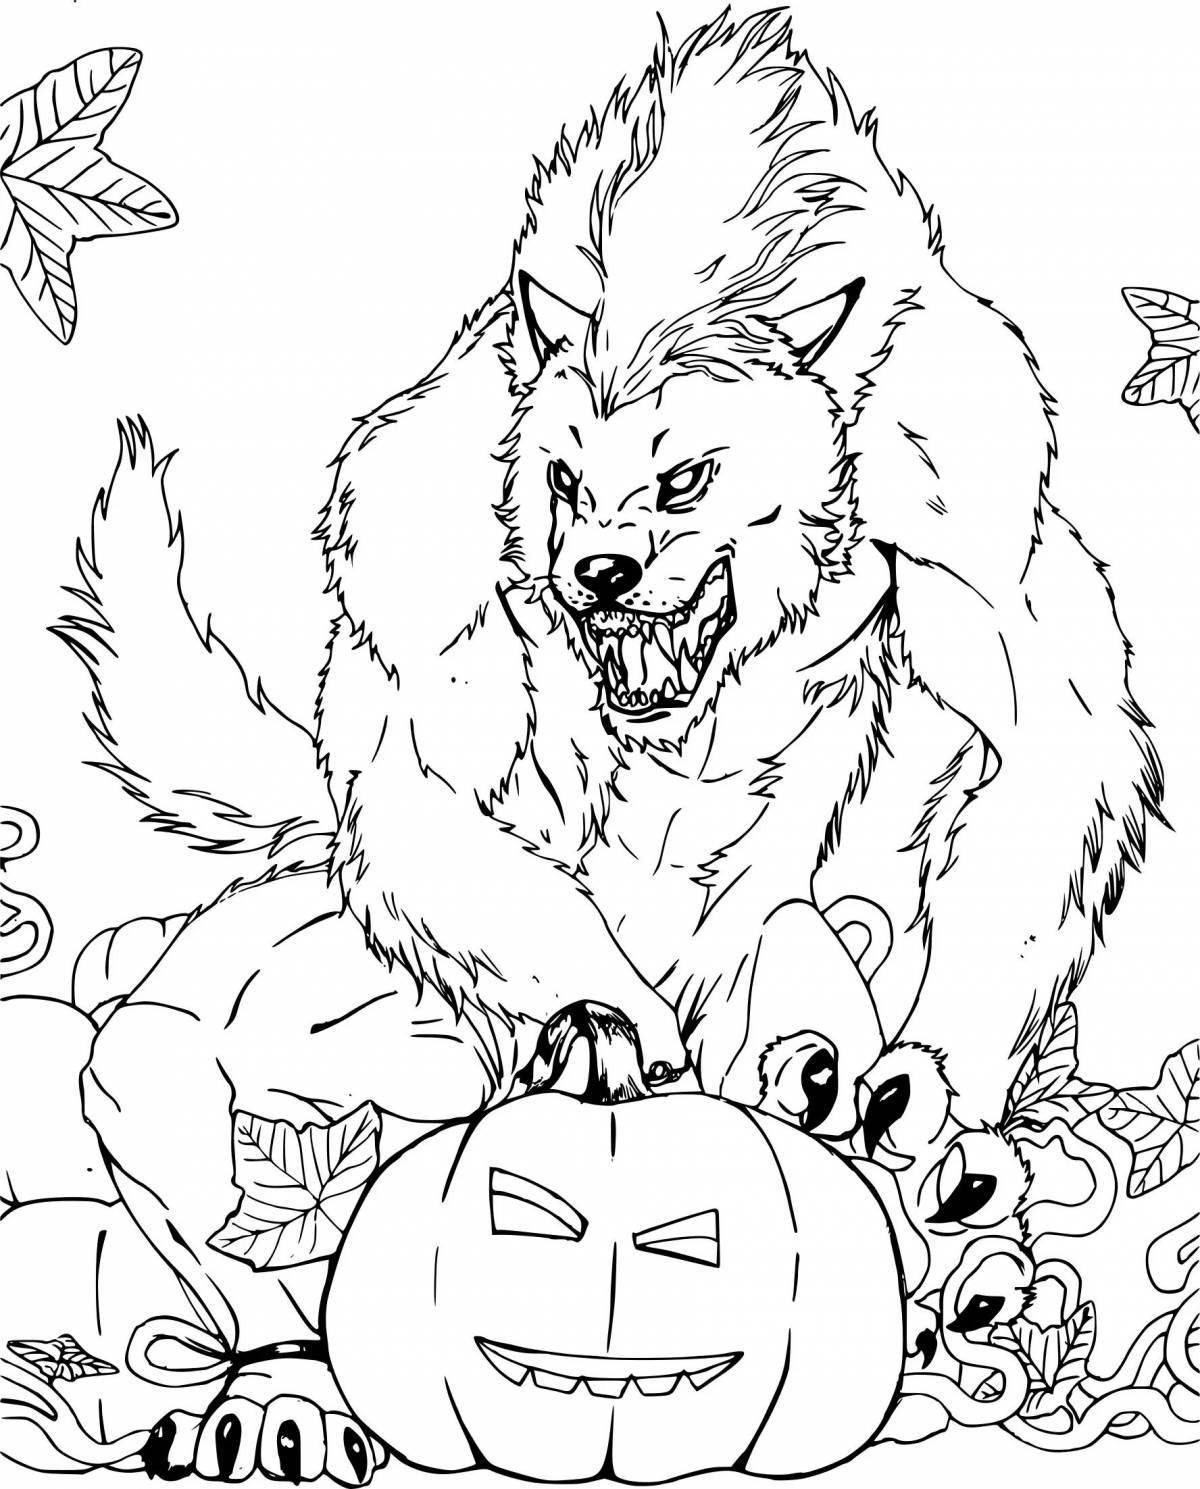 Coloring page mythical werewolf